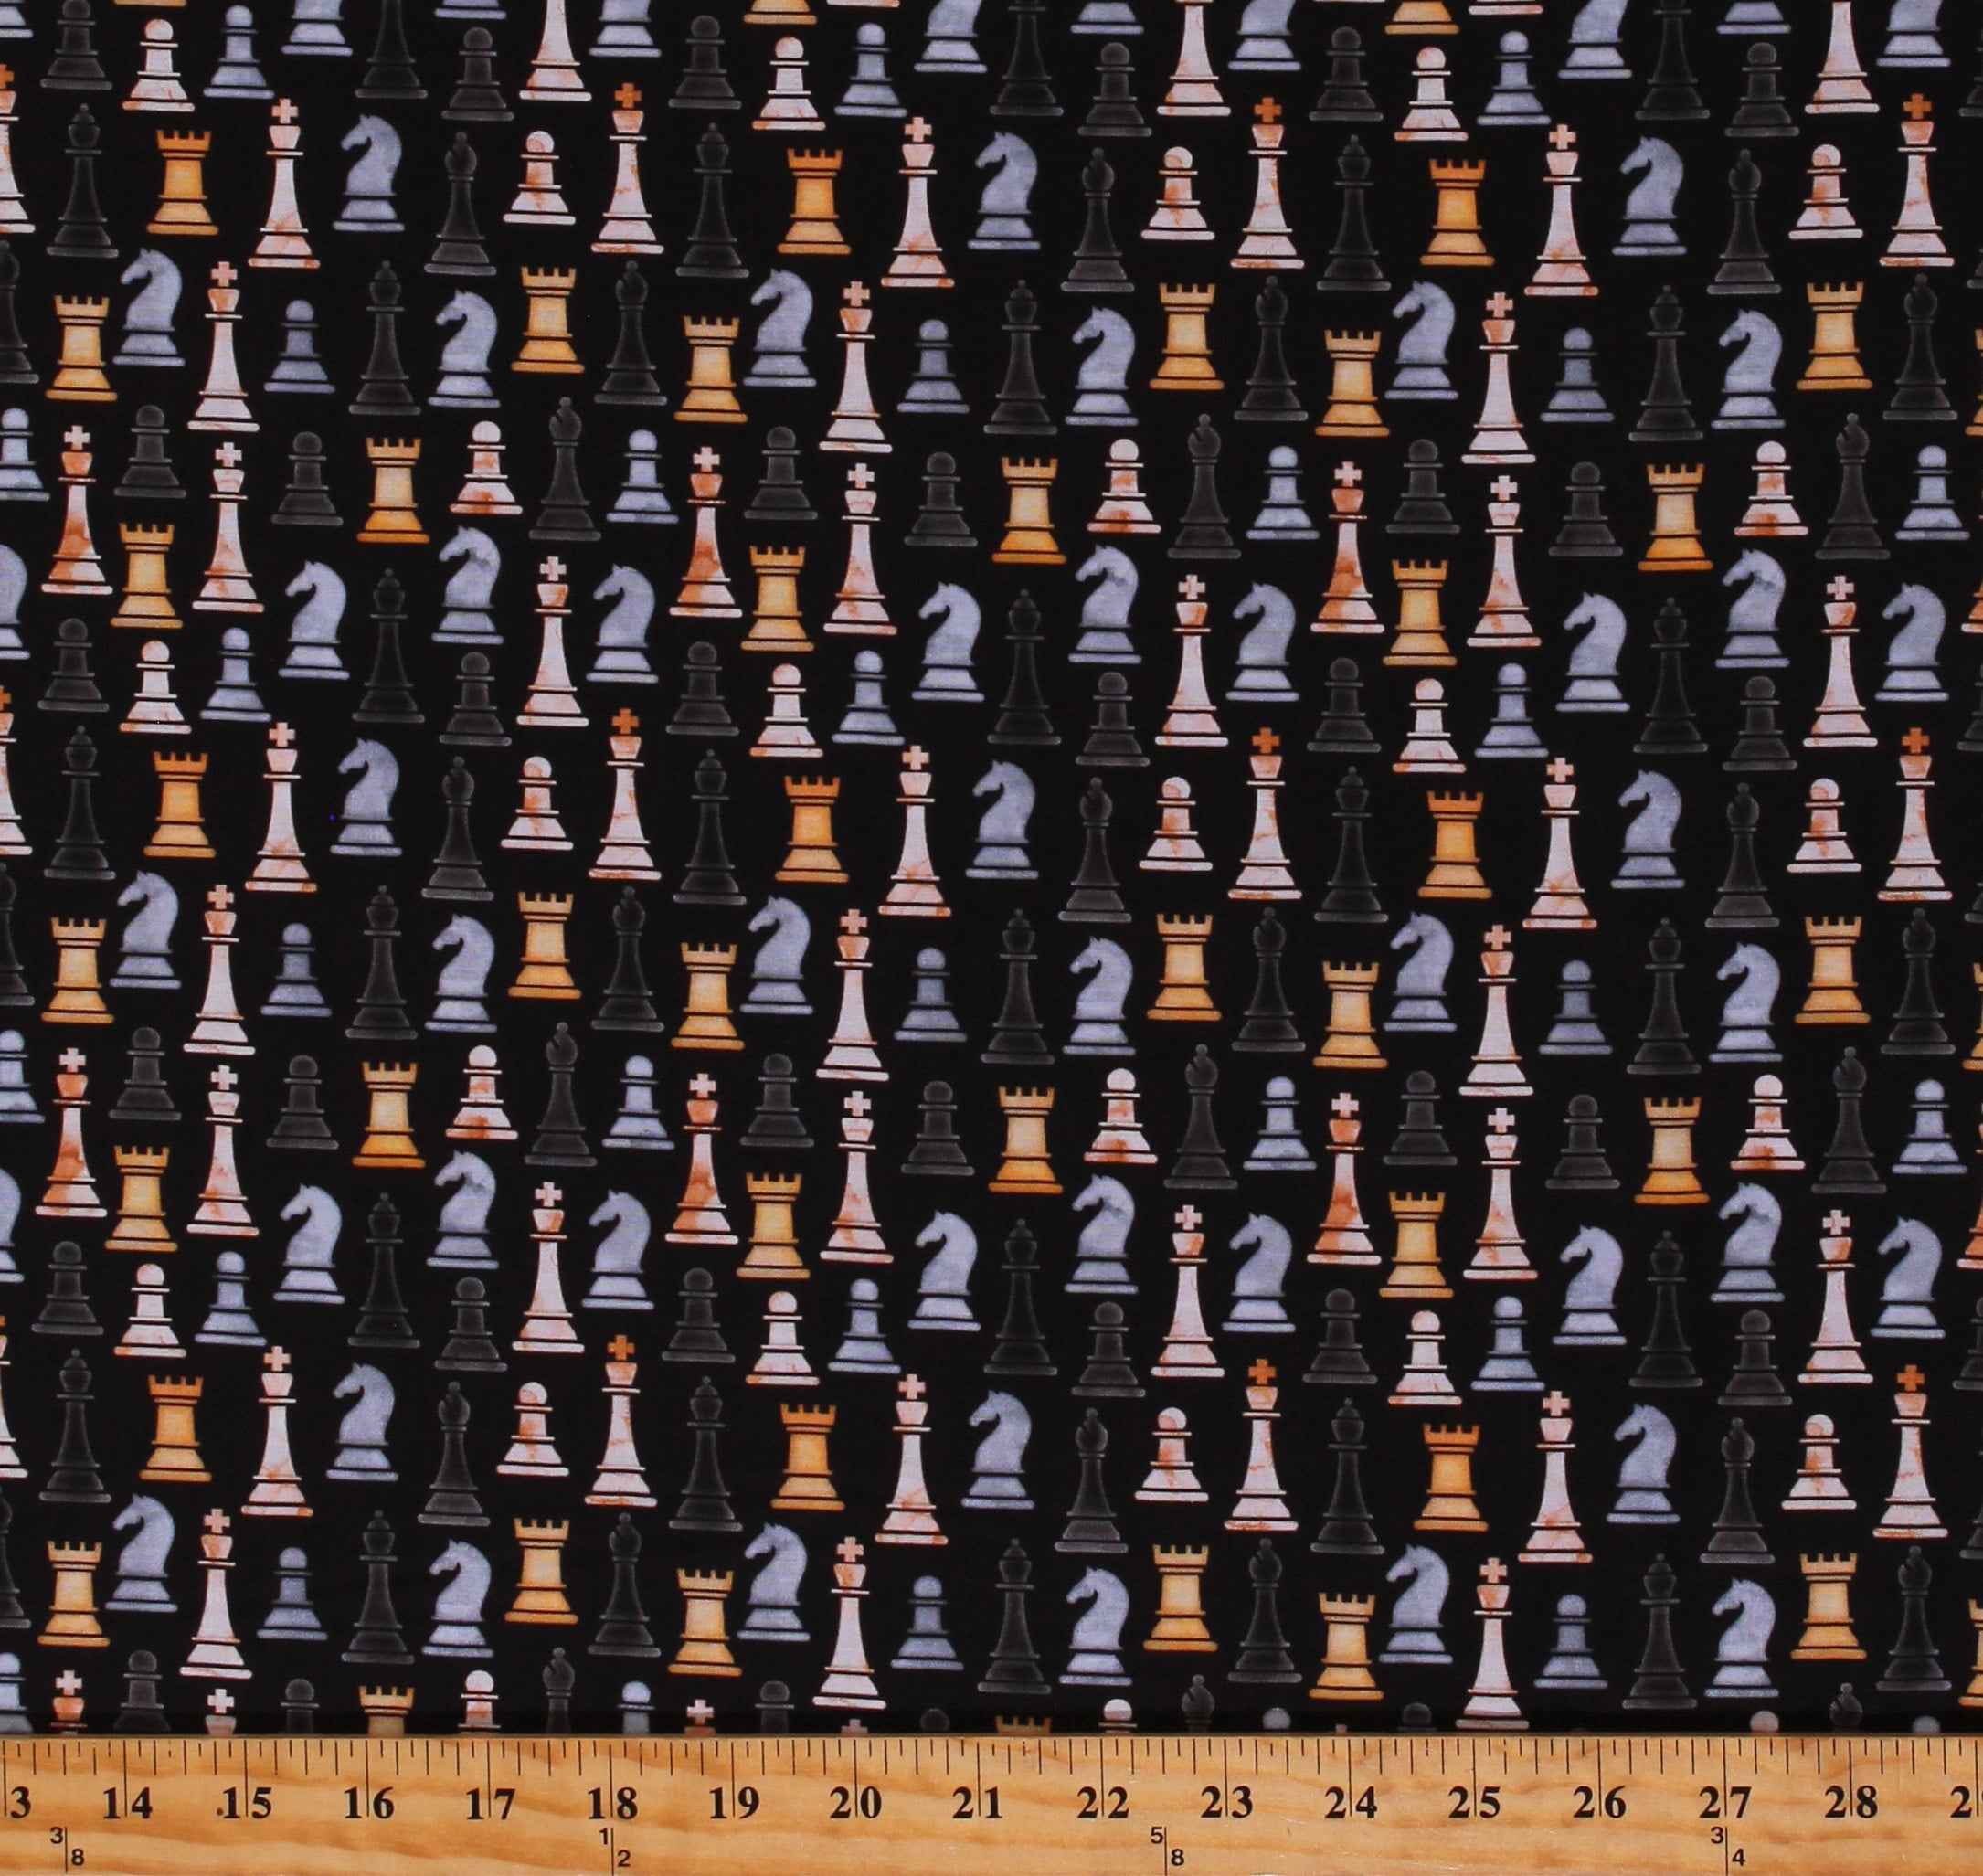 Home Decor Chess Pawns on Black Apparel Fabric Quilting Fabric 100% Cotton Fabric by the Yard Craft Projects